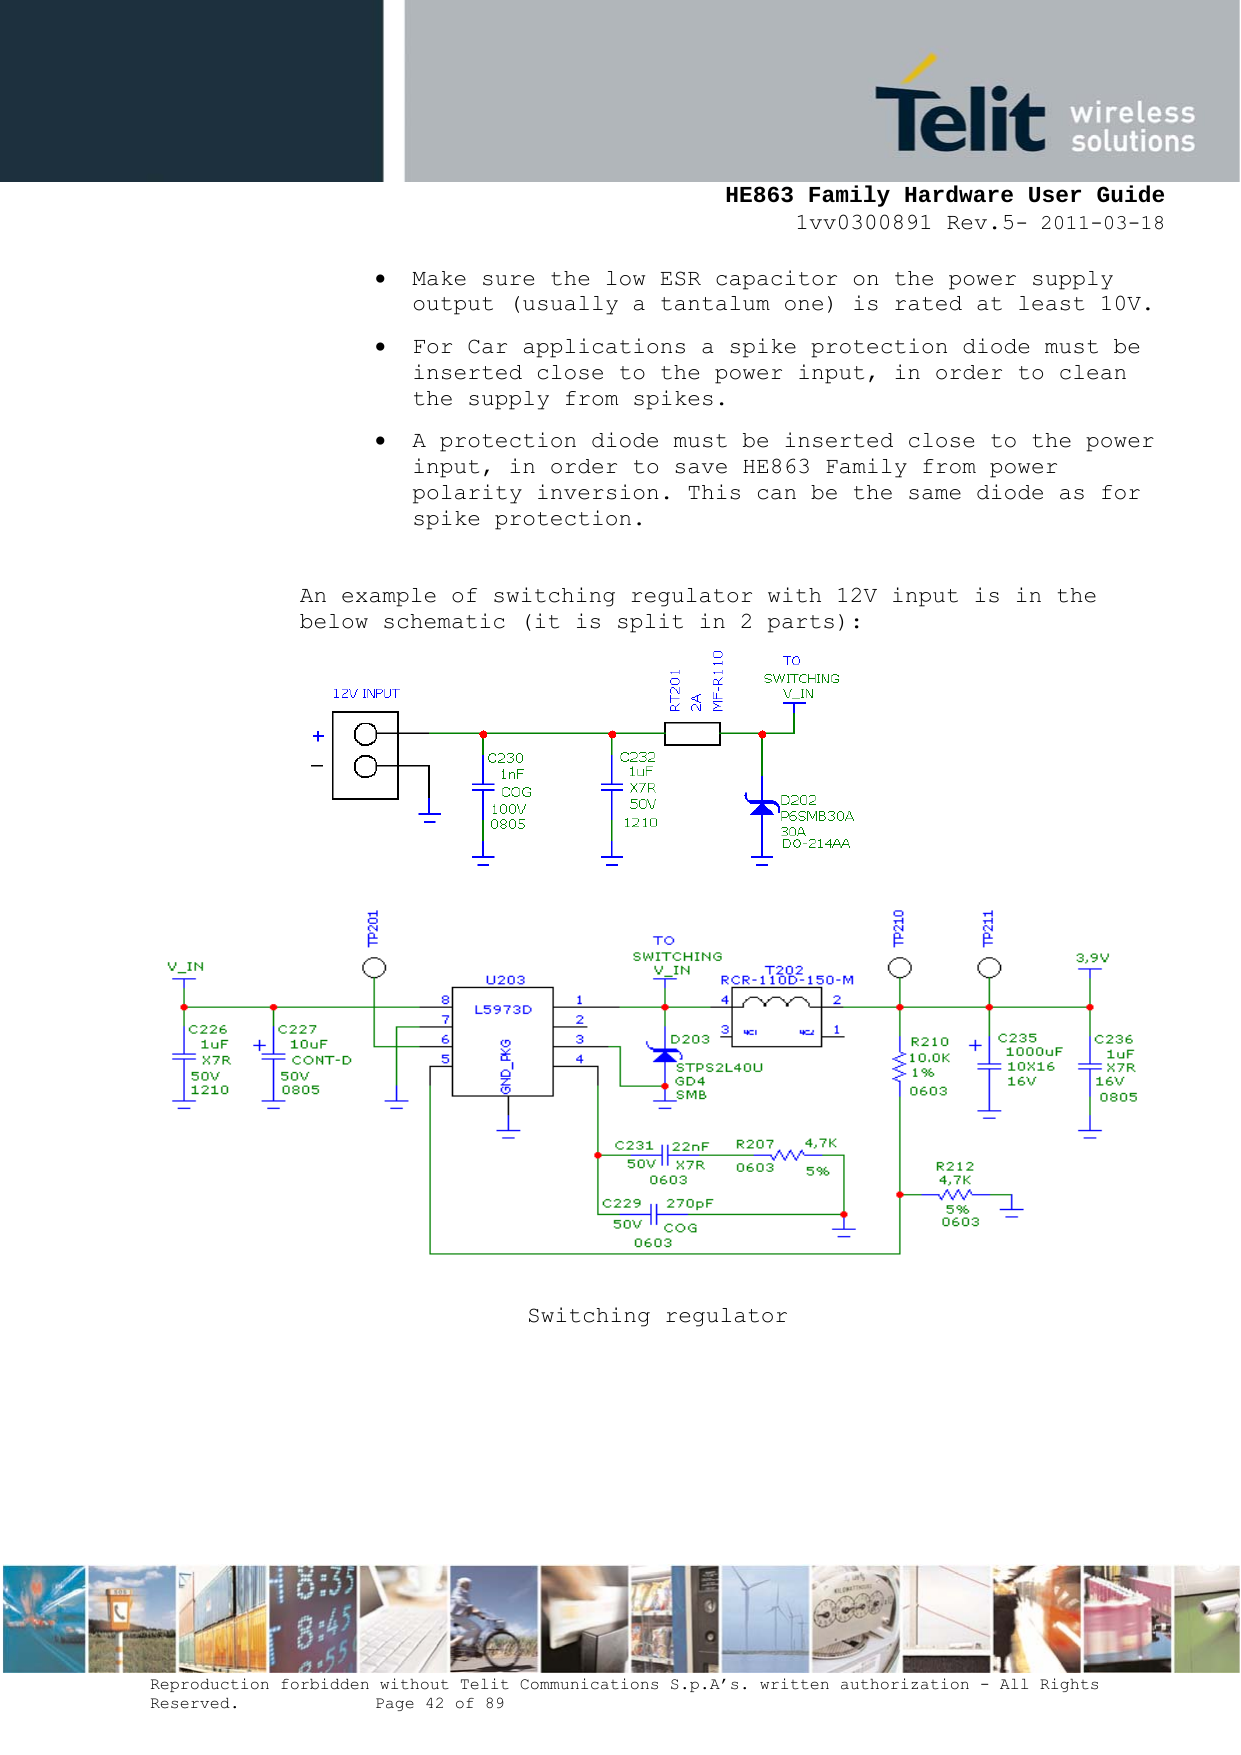     HE863 Family Hardware User Guide 1vv0300891 Rev.5- 2011-03-18    Reproduction forbidden without Telit Communications S.p.A’s. written authorization - All Rights Reserved.    Page 42 of 89   Make sure the low ESR capacitor on the power supply output (usually a tantalum one) is rated at least 10V.  For Car applications a spike protection diode must be inserted close to the power input, in order to clean the supply from spikes.   A protection diode must be inserted close to the power input, in order to save HE863 Family from power polarity inversion. This can be the same diode as for spike protection.  An example of switching regulator with 12V input is in the below schematic (it is split in 2 parts):  Switching regulator      